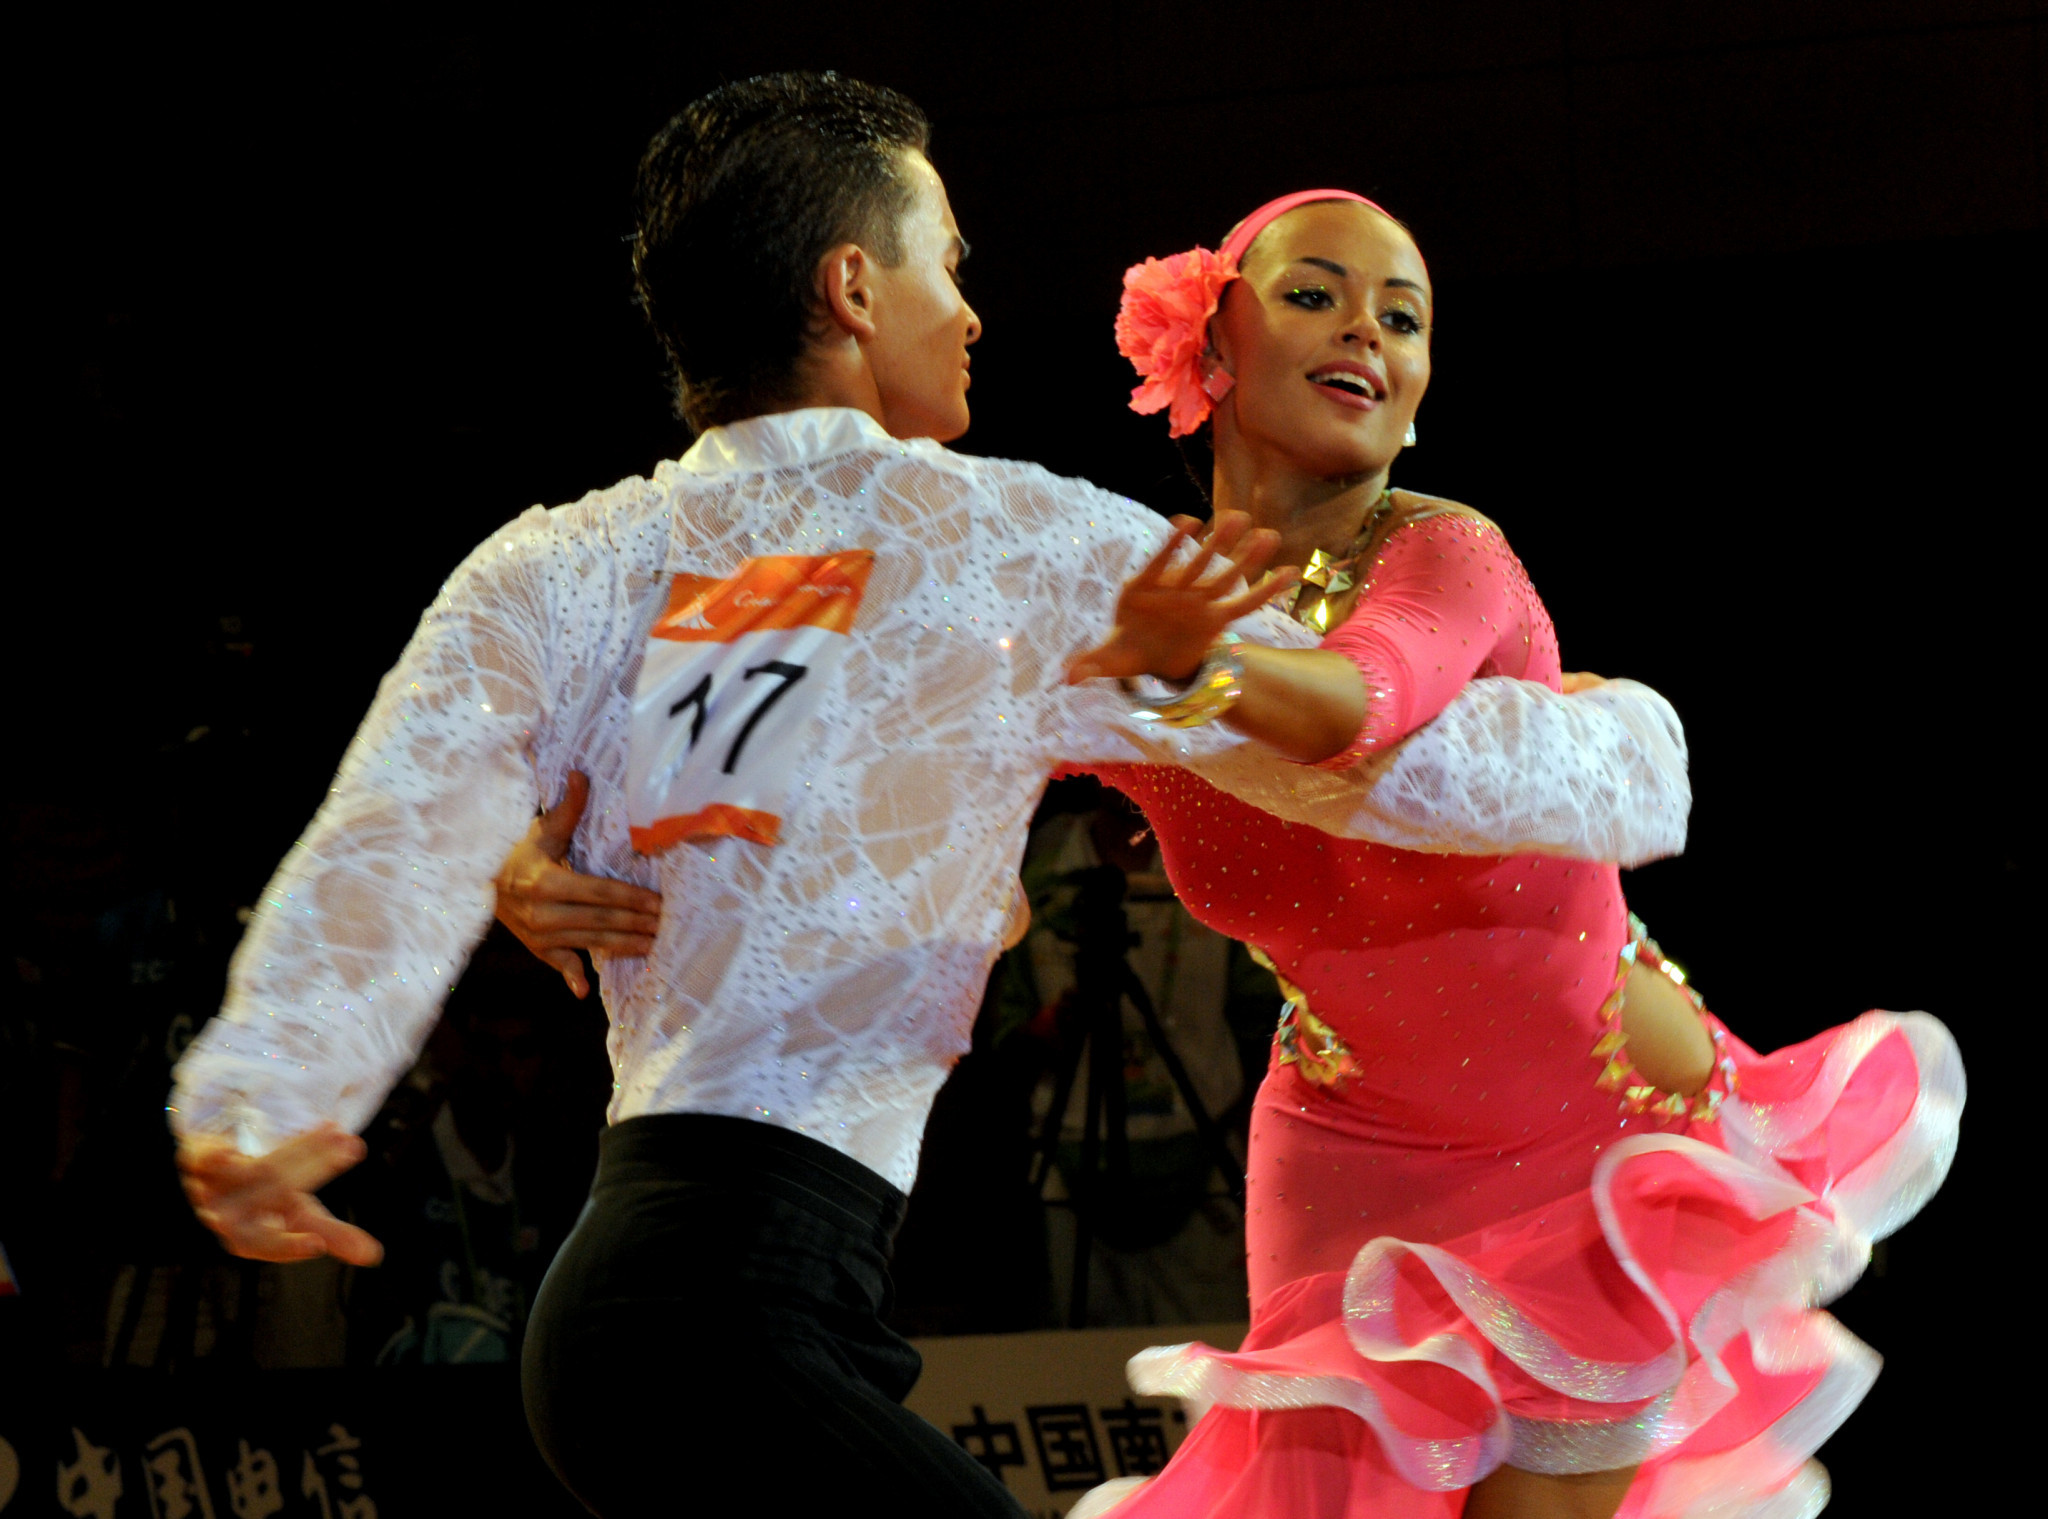 Dancesport has only appeared at the Asian Games once when China won all 10 gold medals at Guangzhou 2010